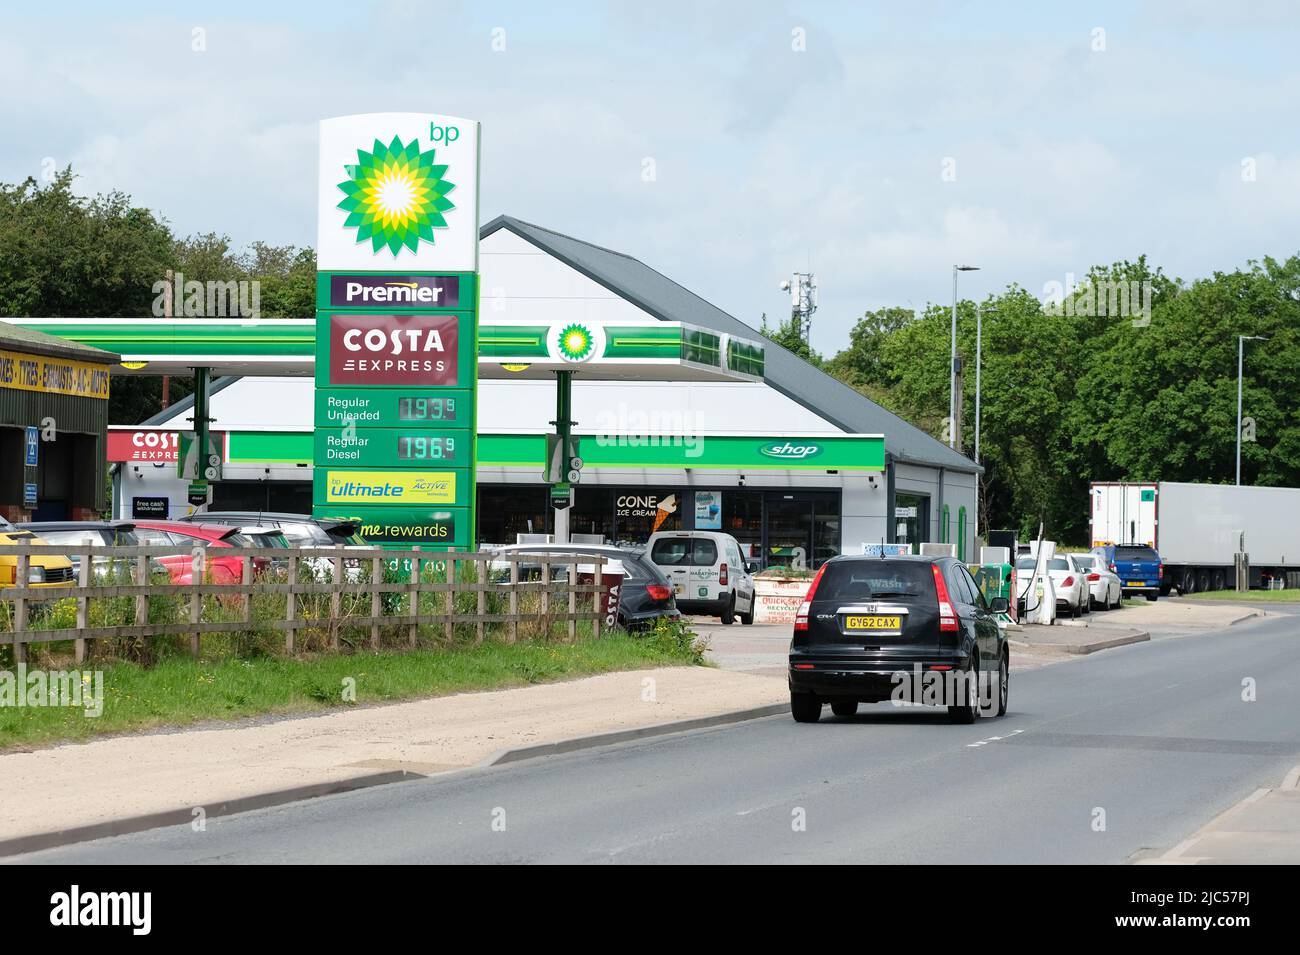 Rotherwas, Hereford, Herefordshire, UK - Friday 10th June 2022 - A motorist passes a BP fuel station in Rotherwas, Hereford with petrol prices shown as £193.9 per litre and diesel at £196.9 per litre almost £2.00 per litre - fuel prices continue to rise. Photo Steven May / Alamy Live News Stock Photo